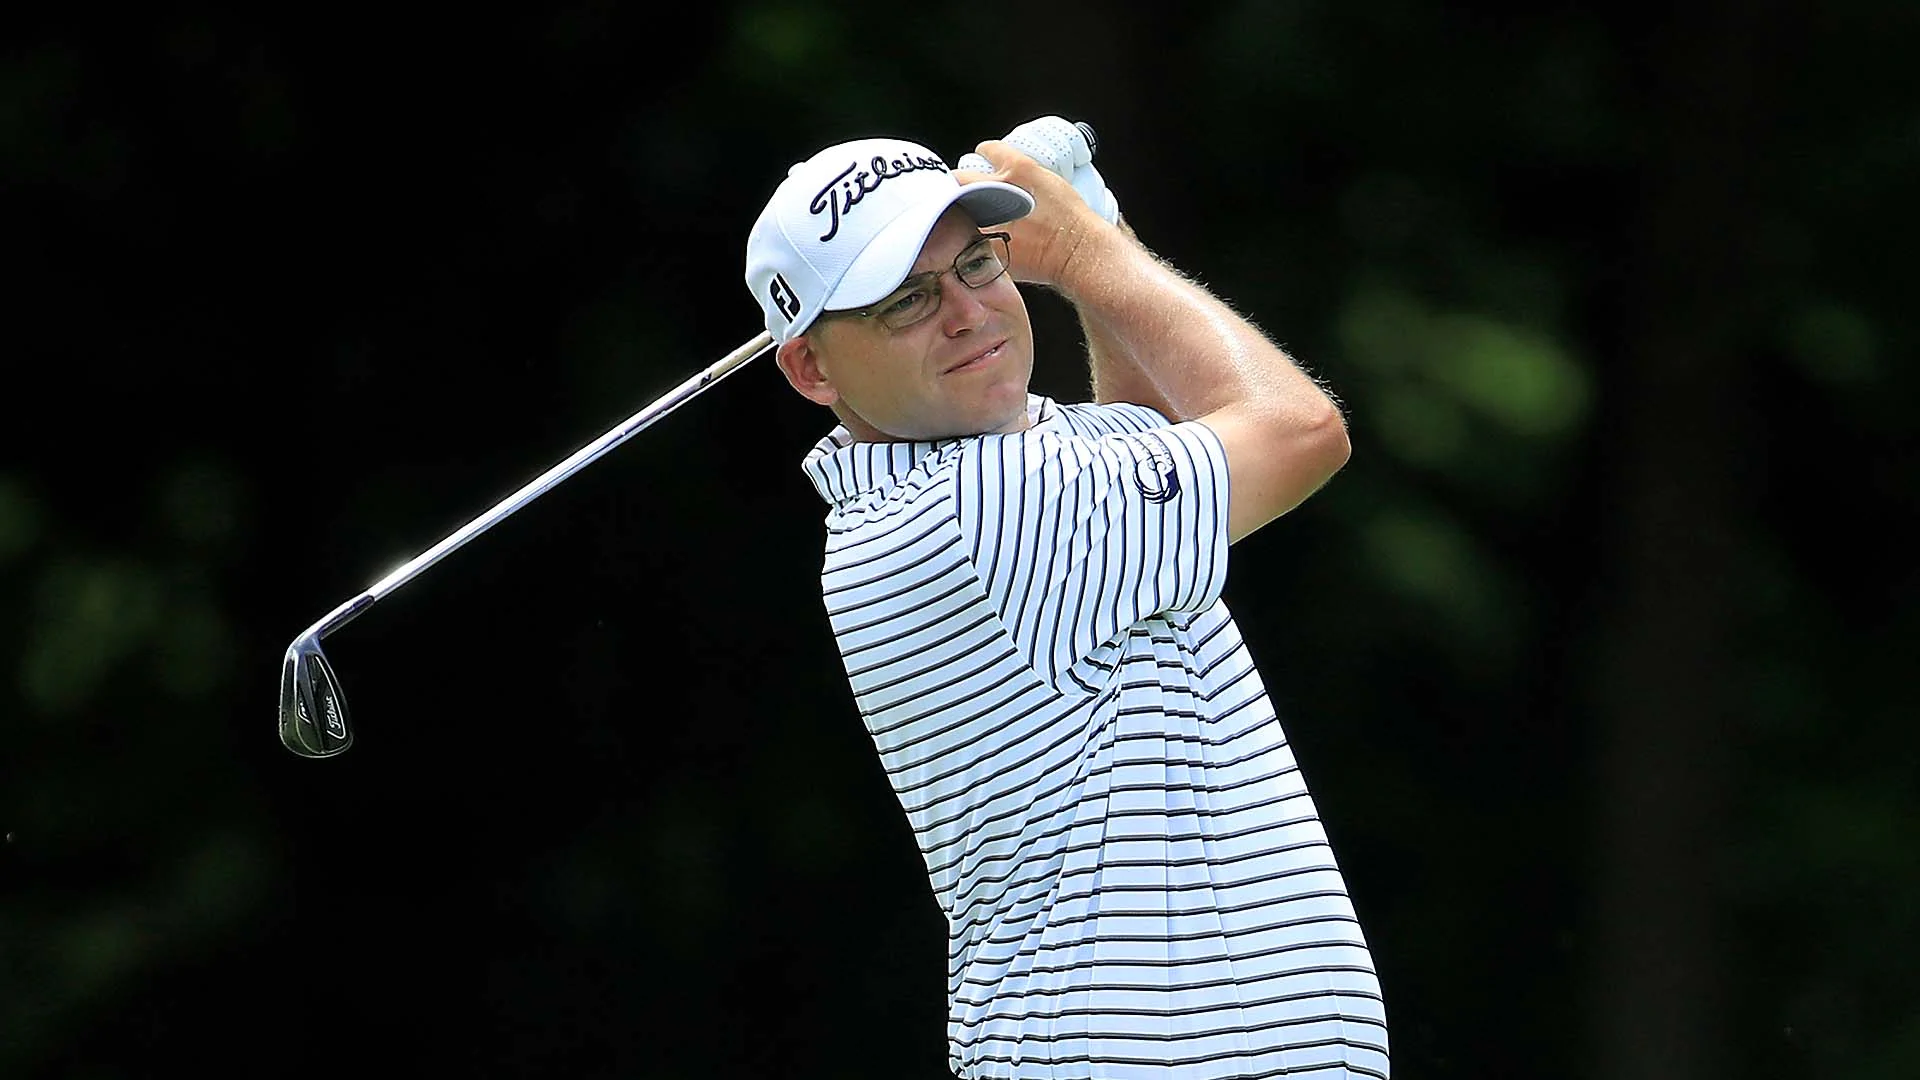 Bill Haas withdraws from RSM Classic after testing positive for COVID-19